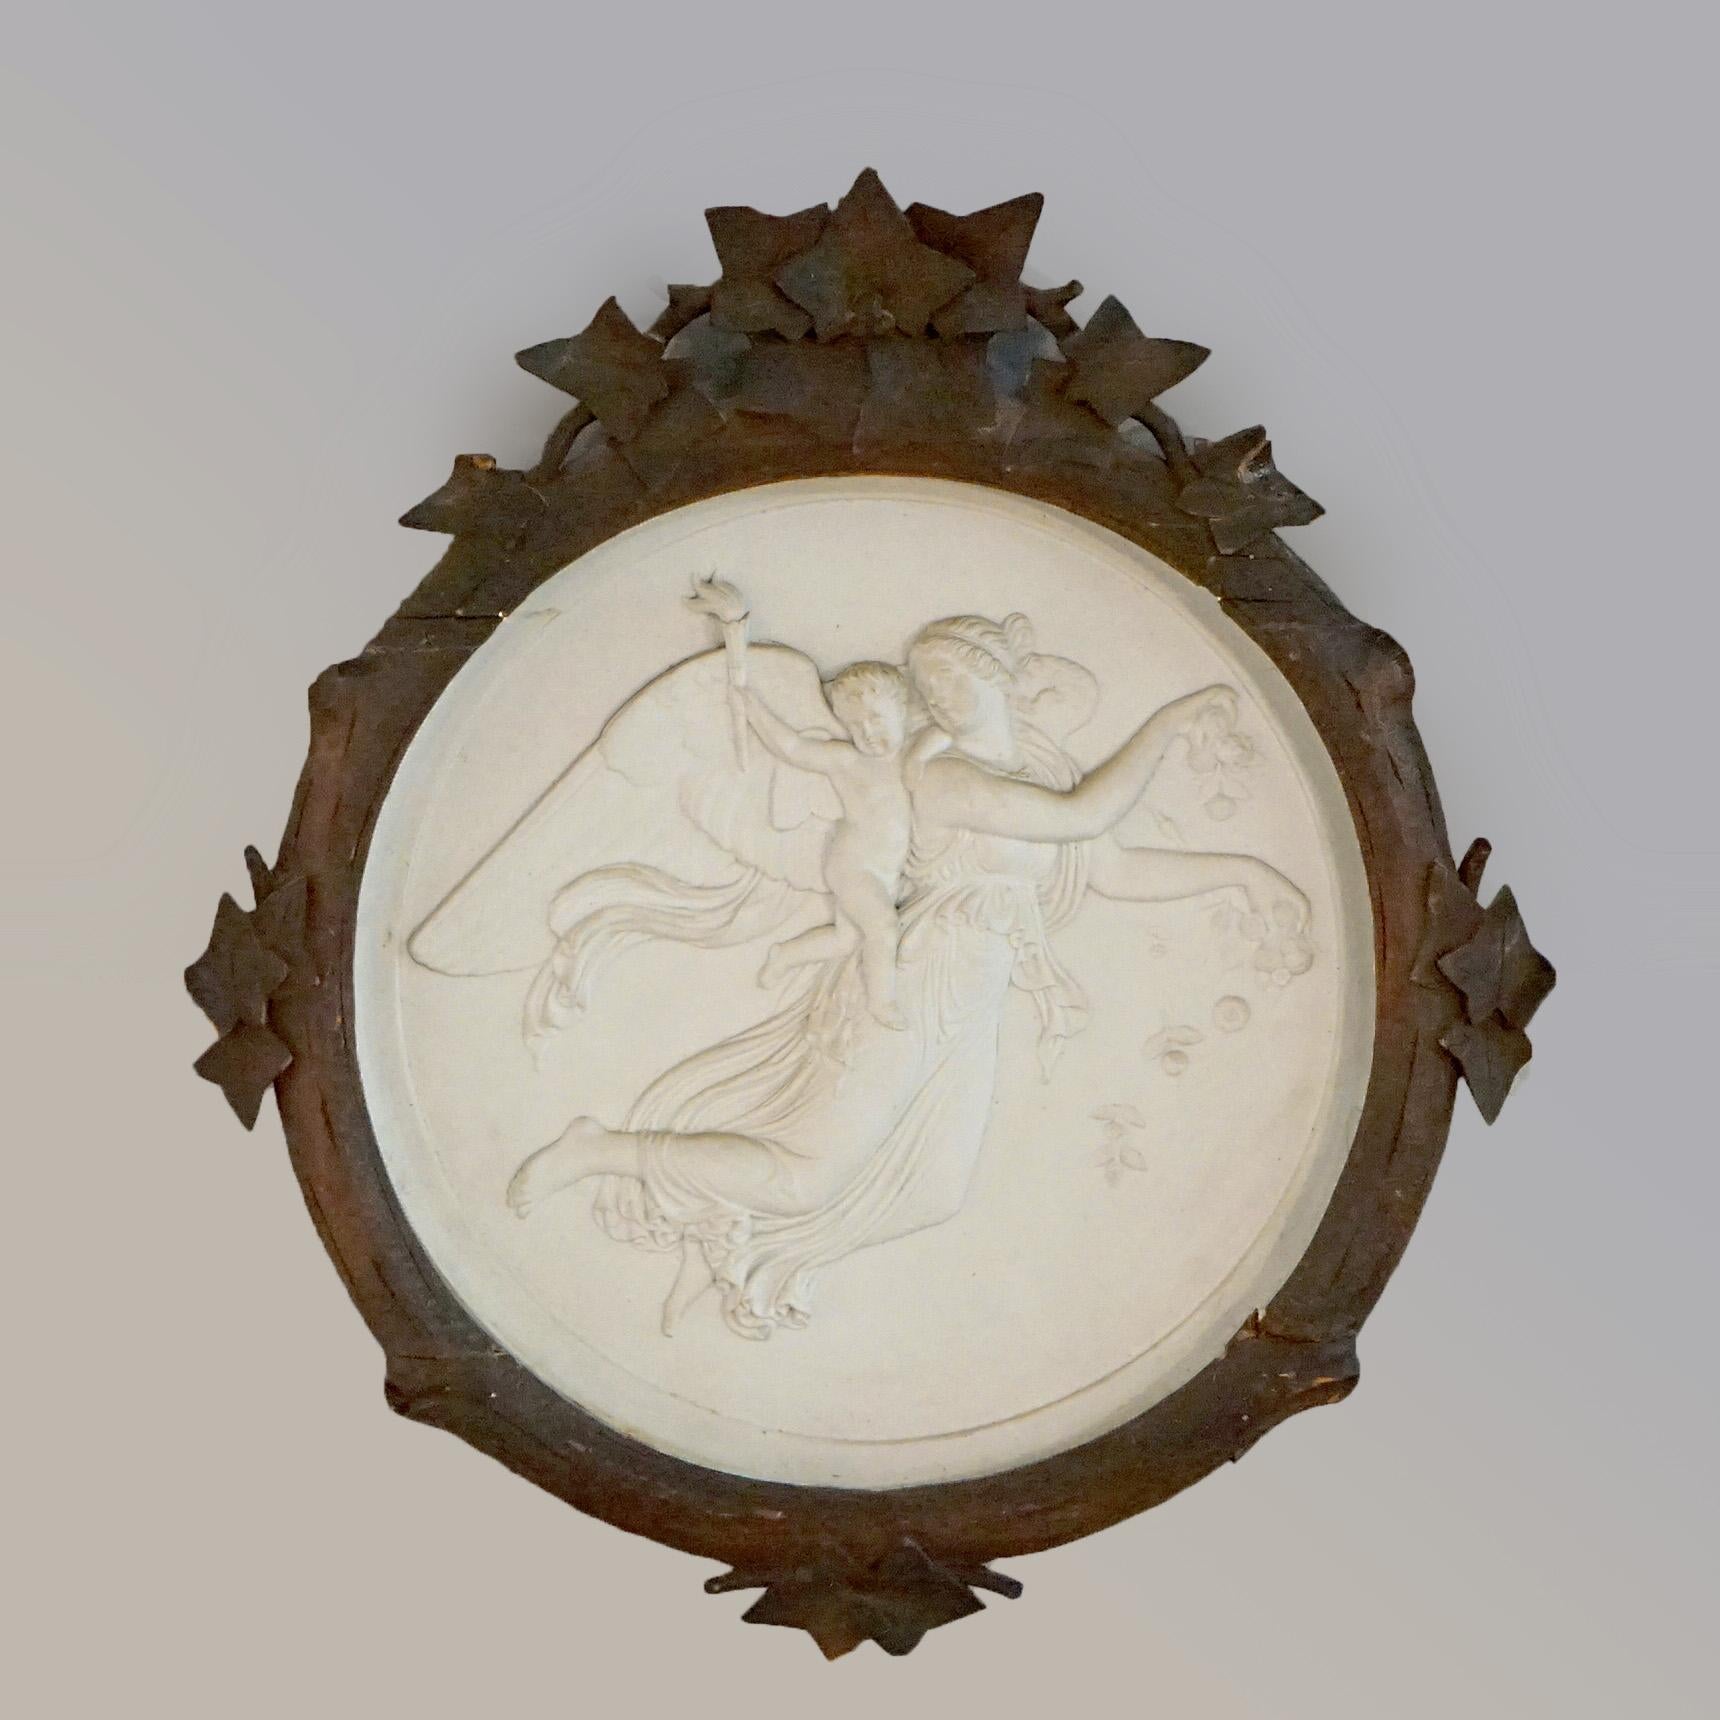 A pair of antique Classical wall plaques offer parian porcelain with mother angels with their babies in relief, seated in carved walnut frames, 19th century

Measures- 20''H x 18.25''W x 1.75''D